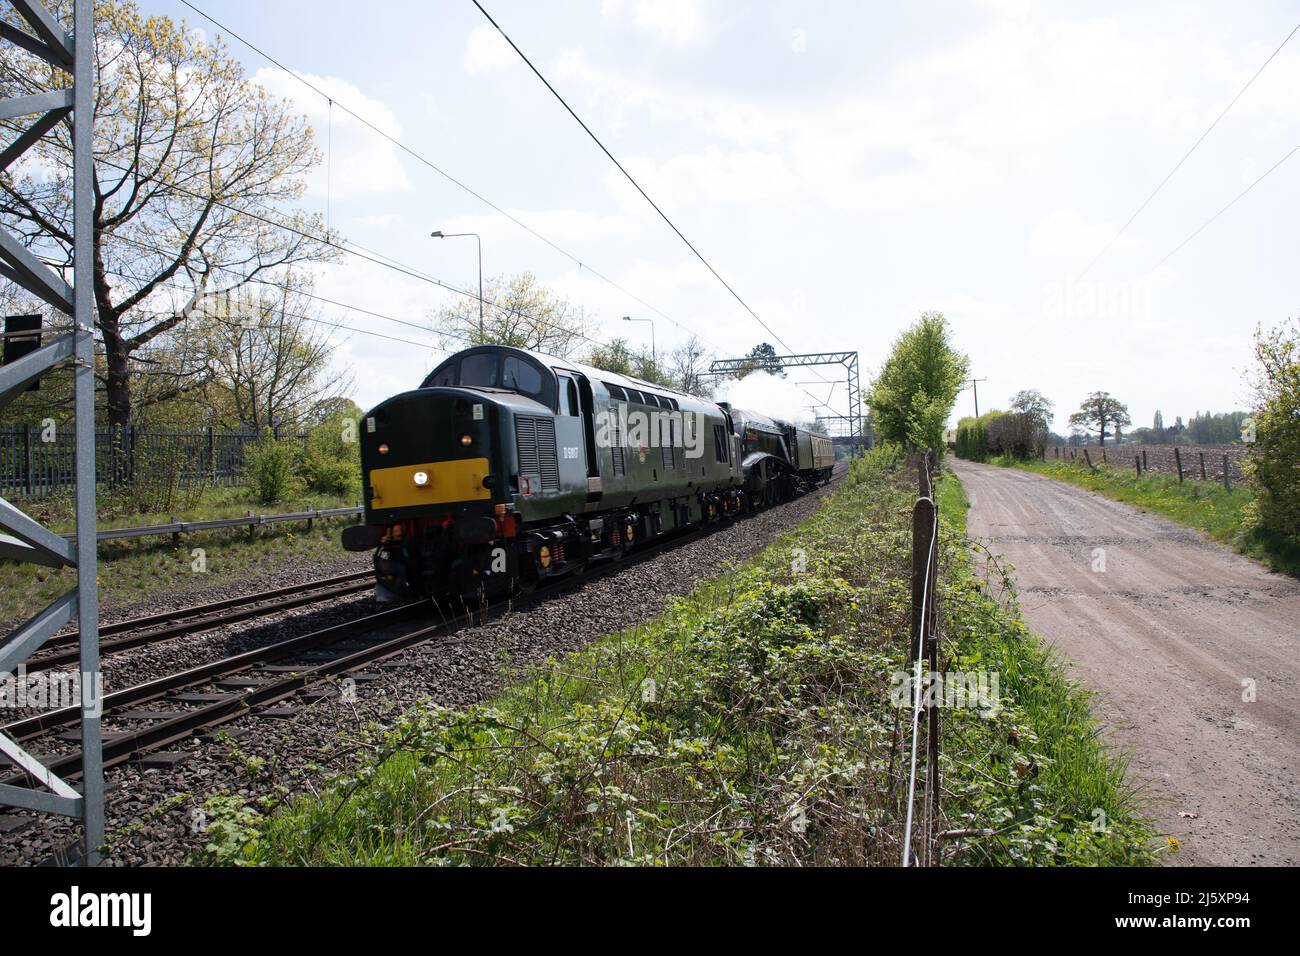 Staffordshire, UK 26th April 2022.  Steam train 60007 ”Sir Nigel Gresley” passes through Penkridge behind a diesel locomotive en route to Crewe after being the star attraction at the Severn Valley Railway Spring Gala over the weekend .  Credit Richard O'Donoghue/Alamy Live News Stock Photo